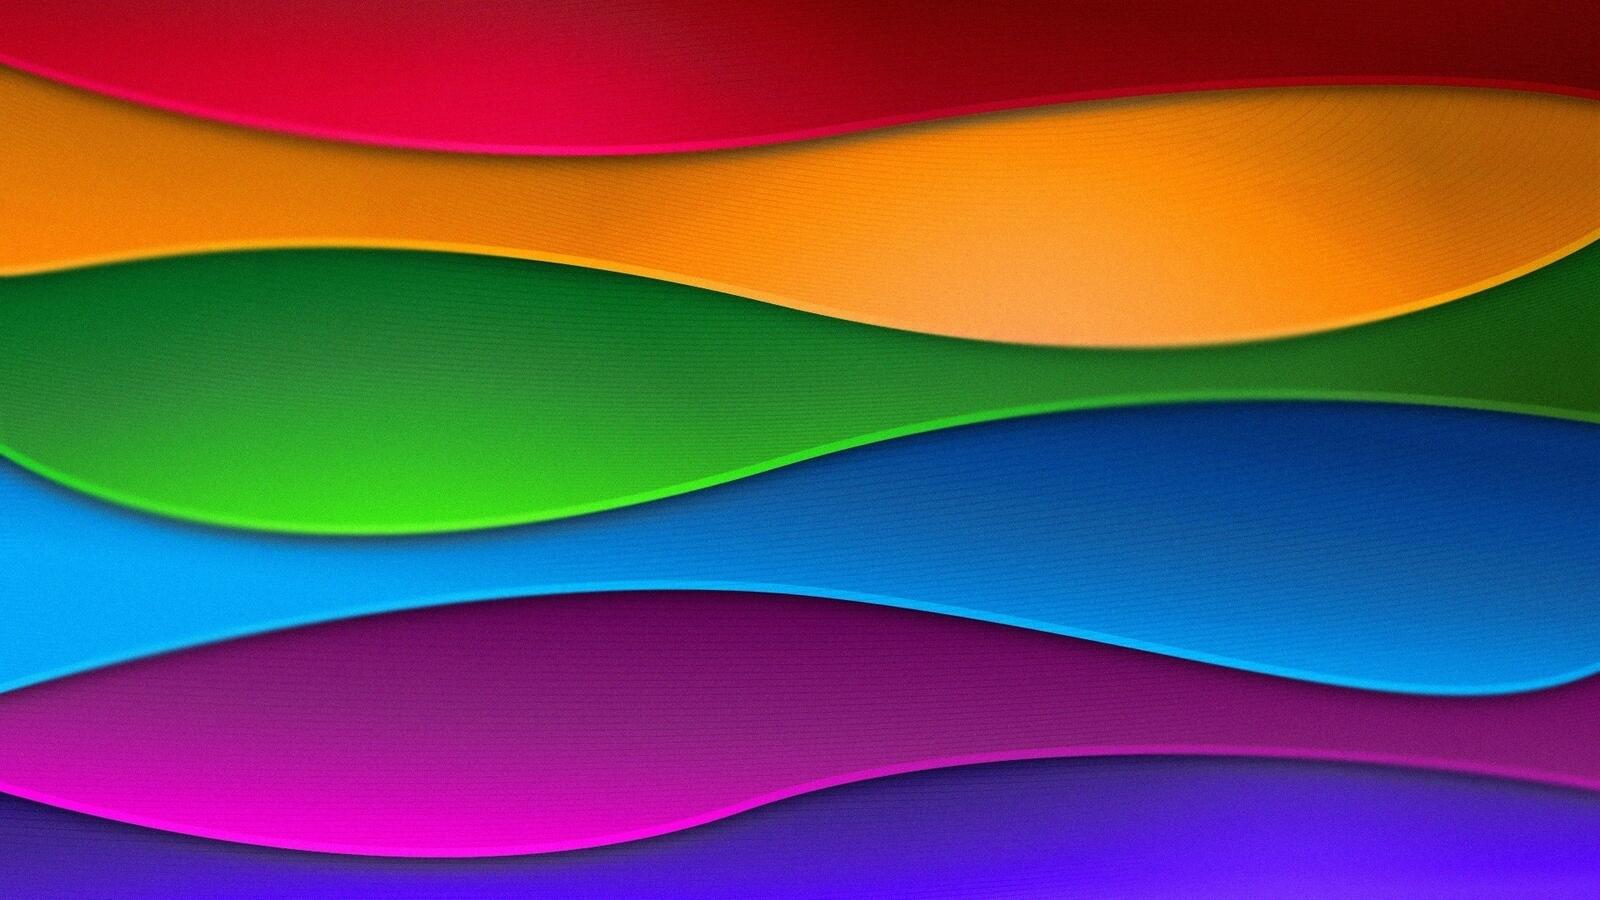 Wallpapers layers light bright on the desktop